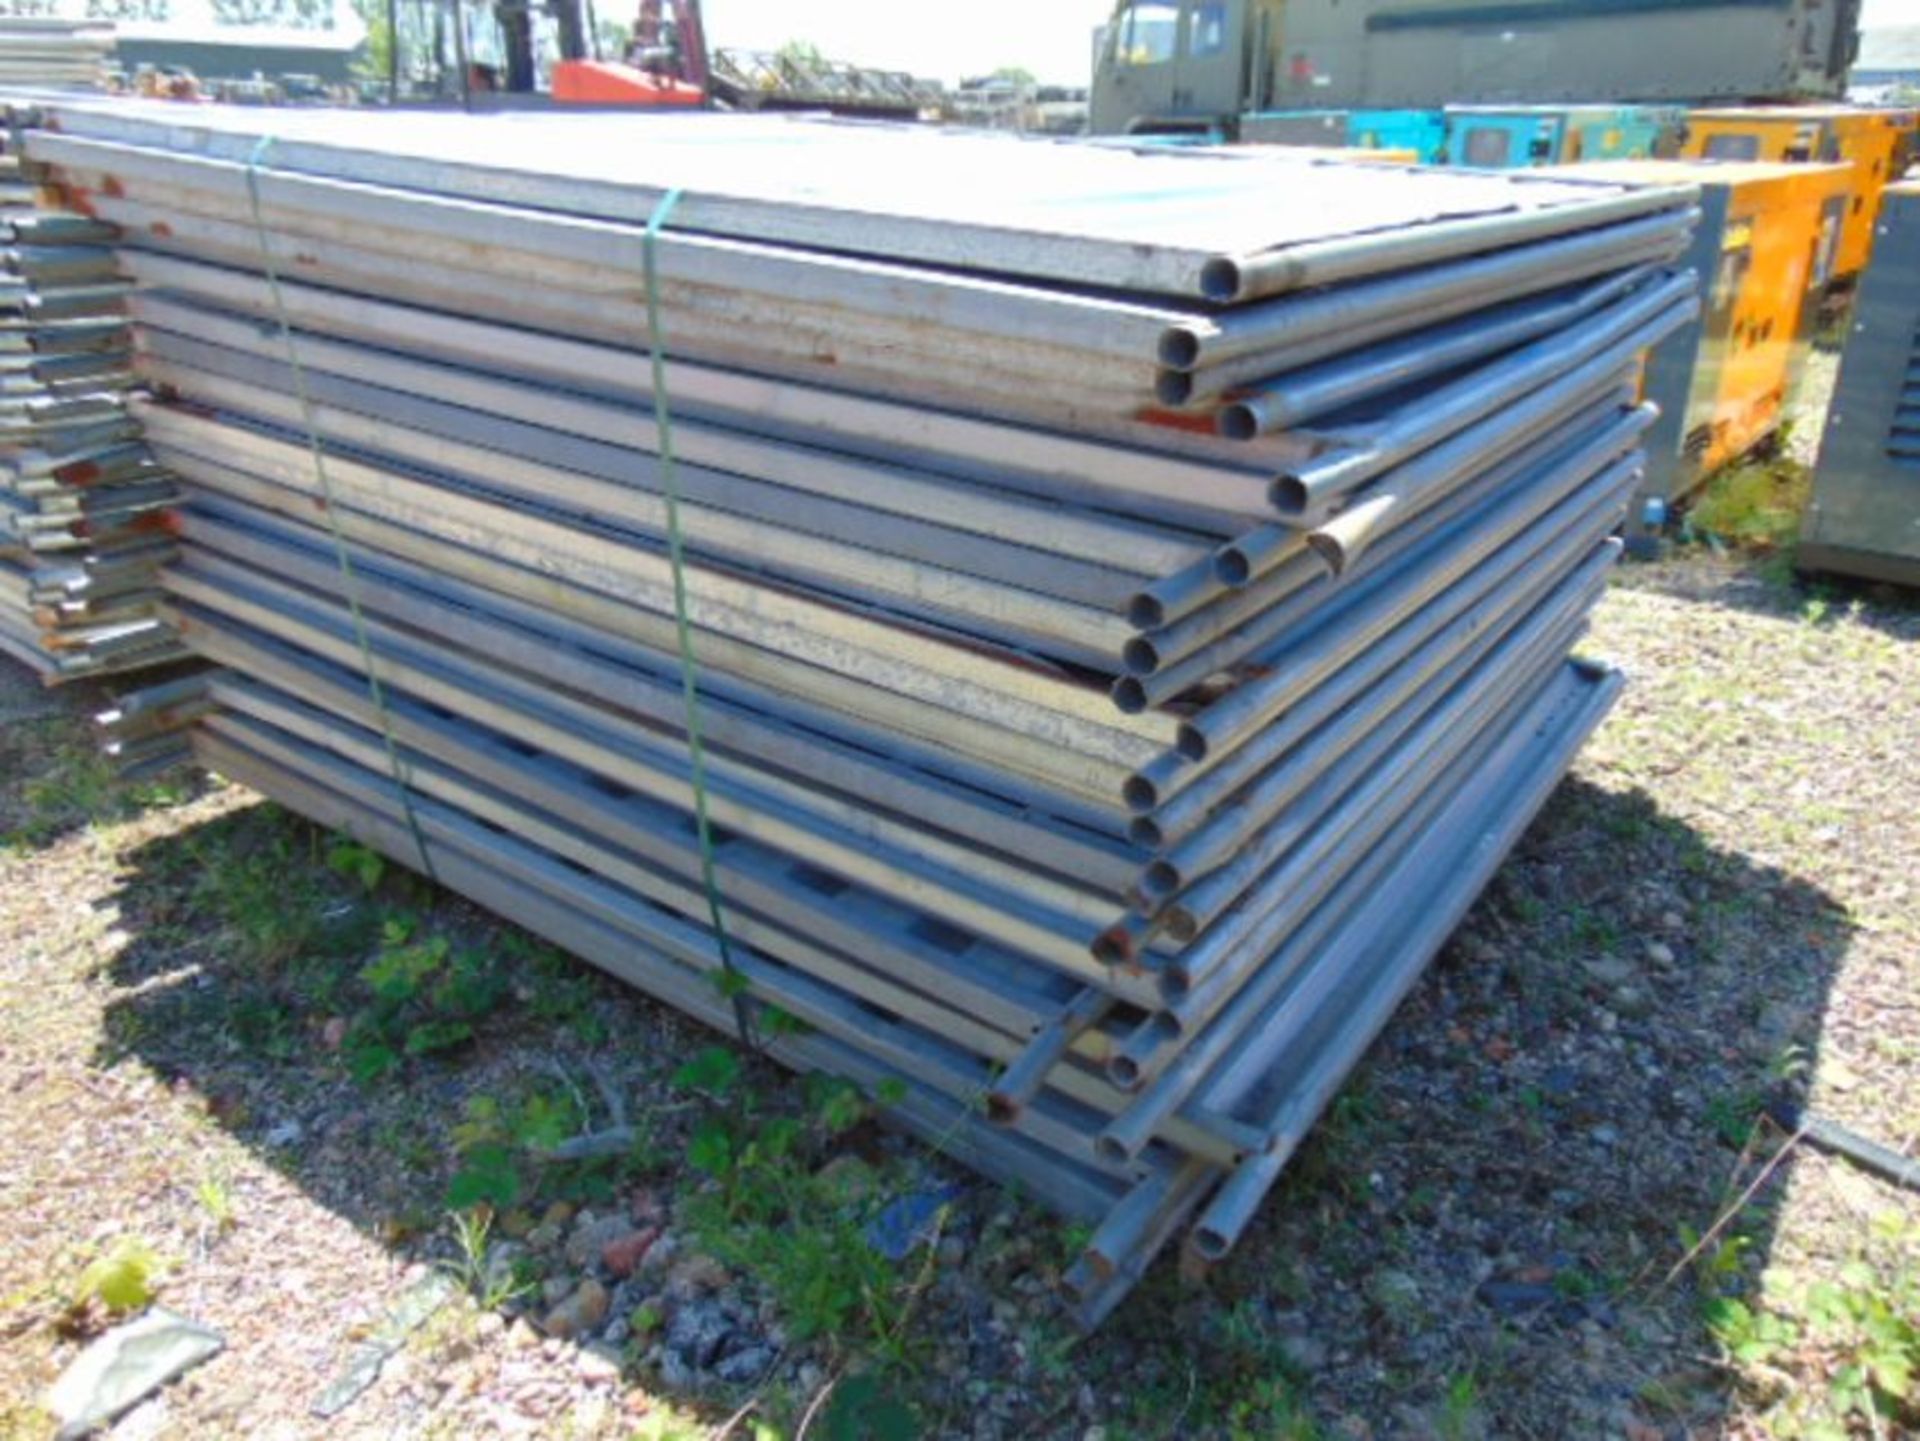 30 x Heras Style Hoarding / Security Fencing Panels 2.15m x 2m - Image 3 of 5